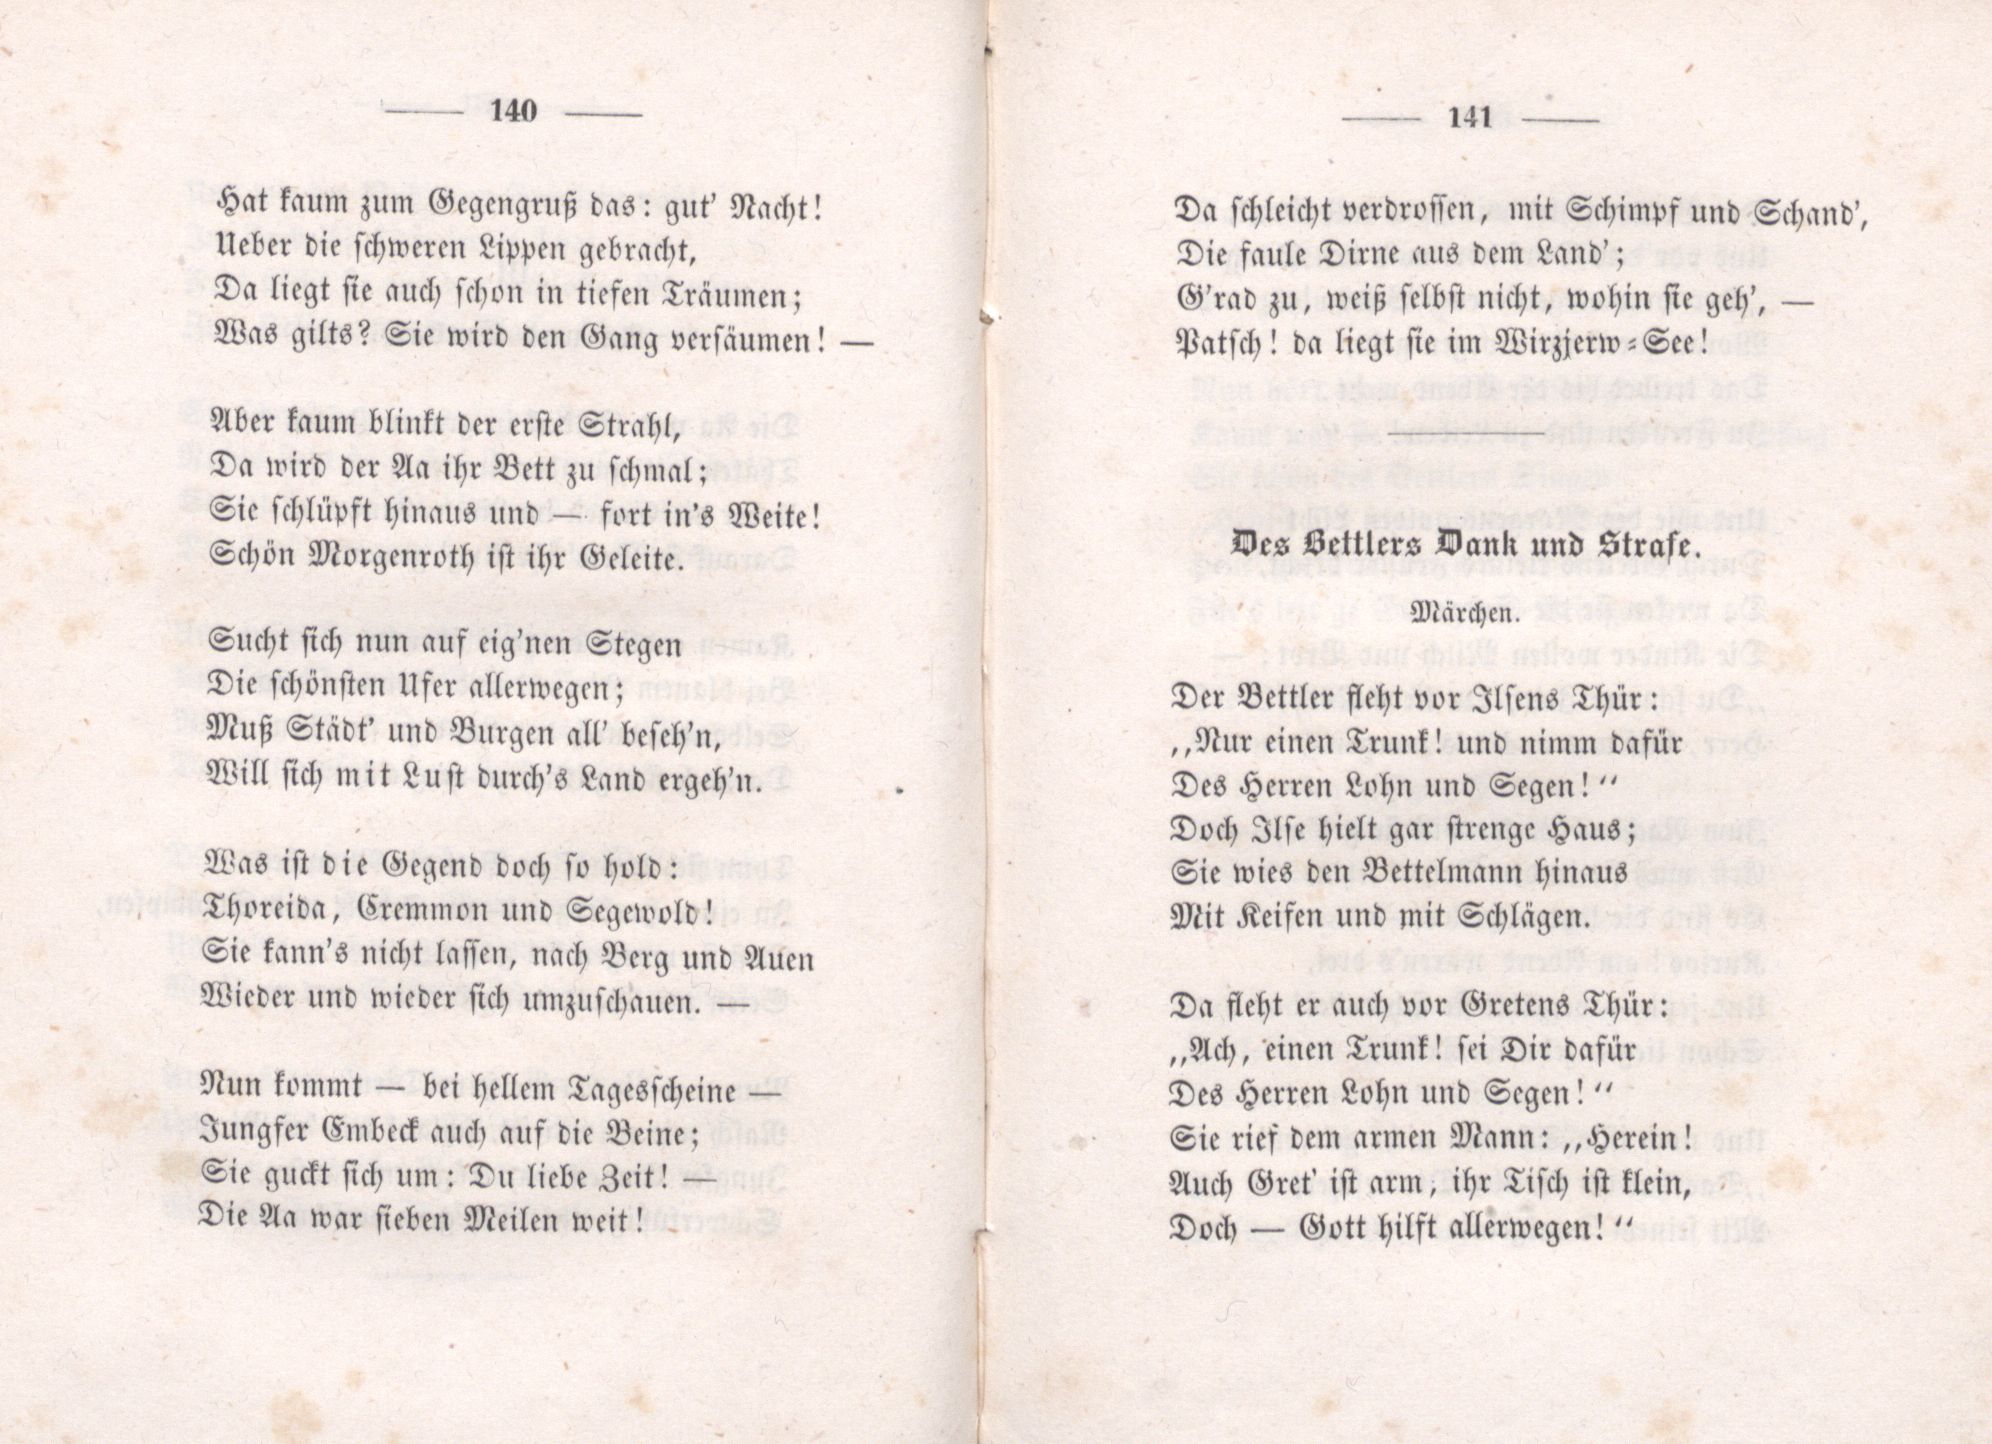 Aa und Embach (1851) | 2. (140-141) Main body of text